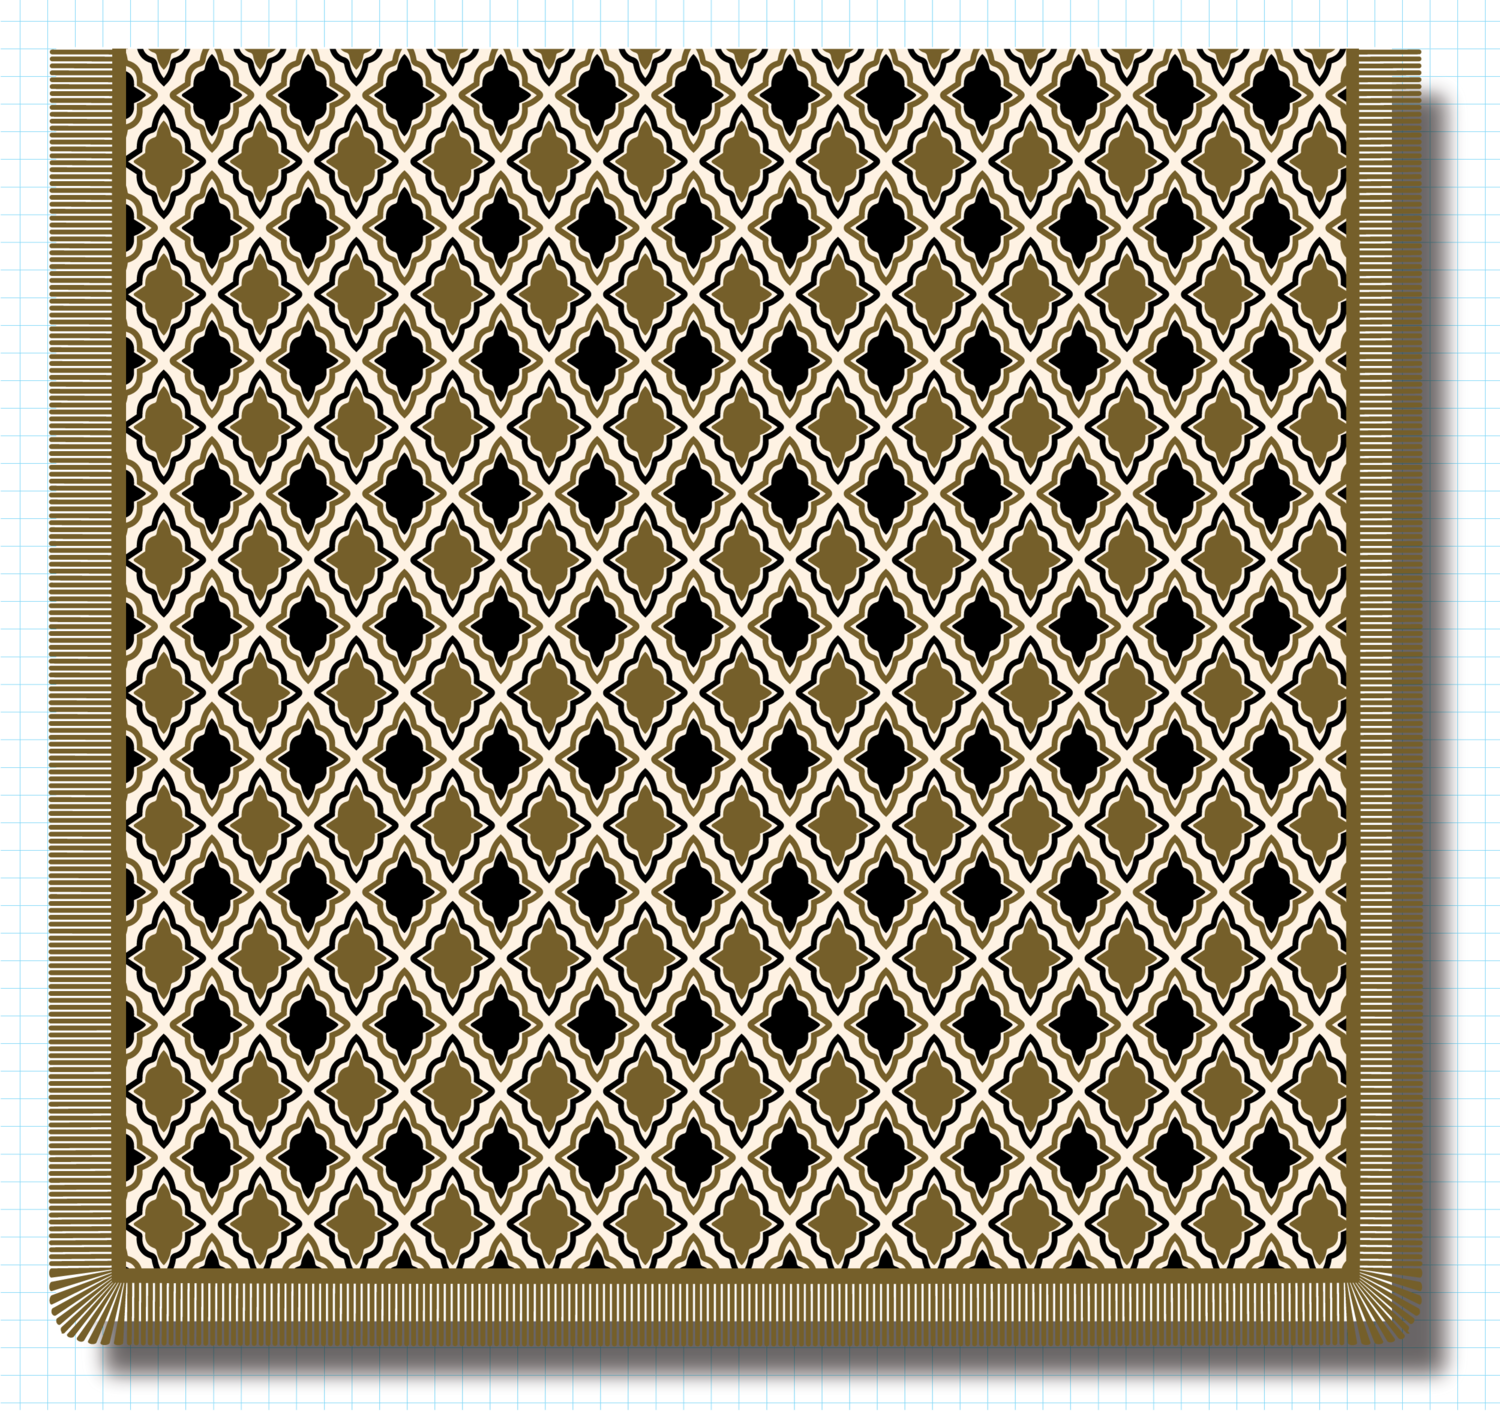 Weave Got Maille Triangle Pattern Etched Anodized Aluminum Sheets